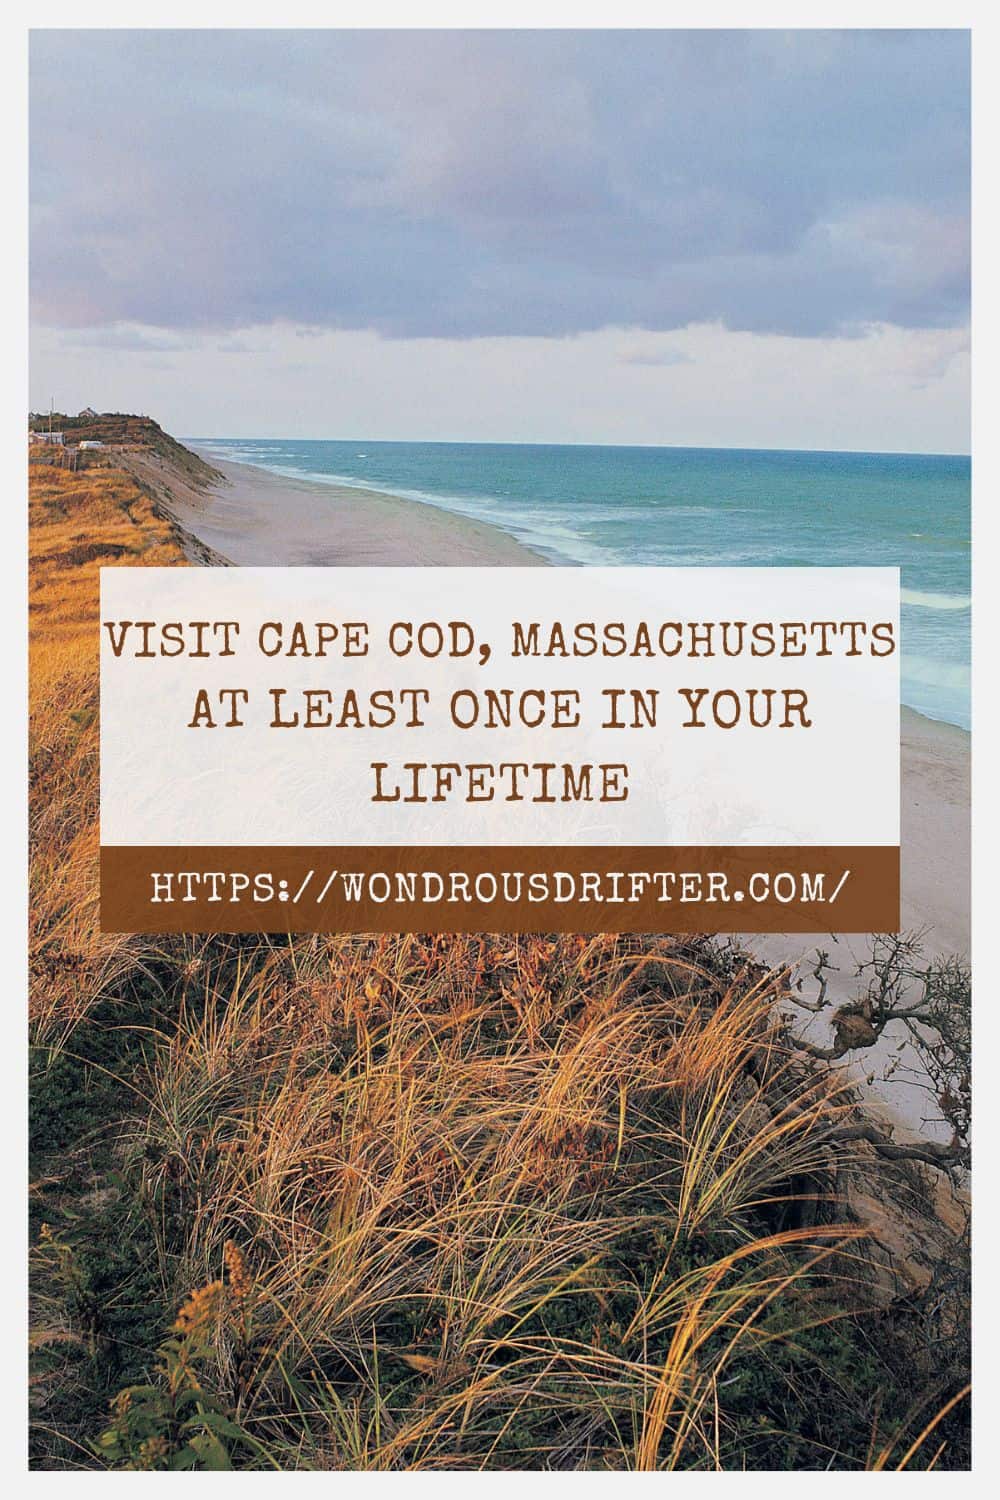 Visit Cape Cod Massachusetts at least once in your lifetime